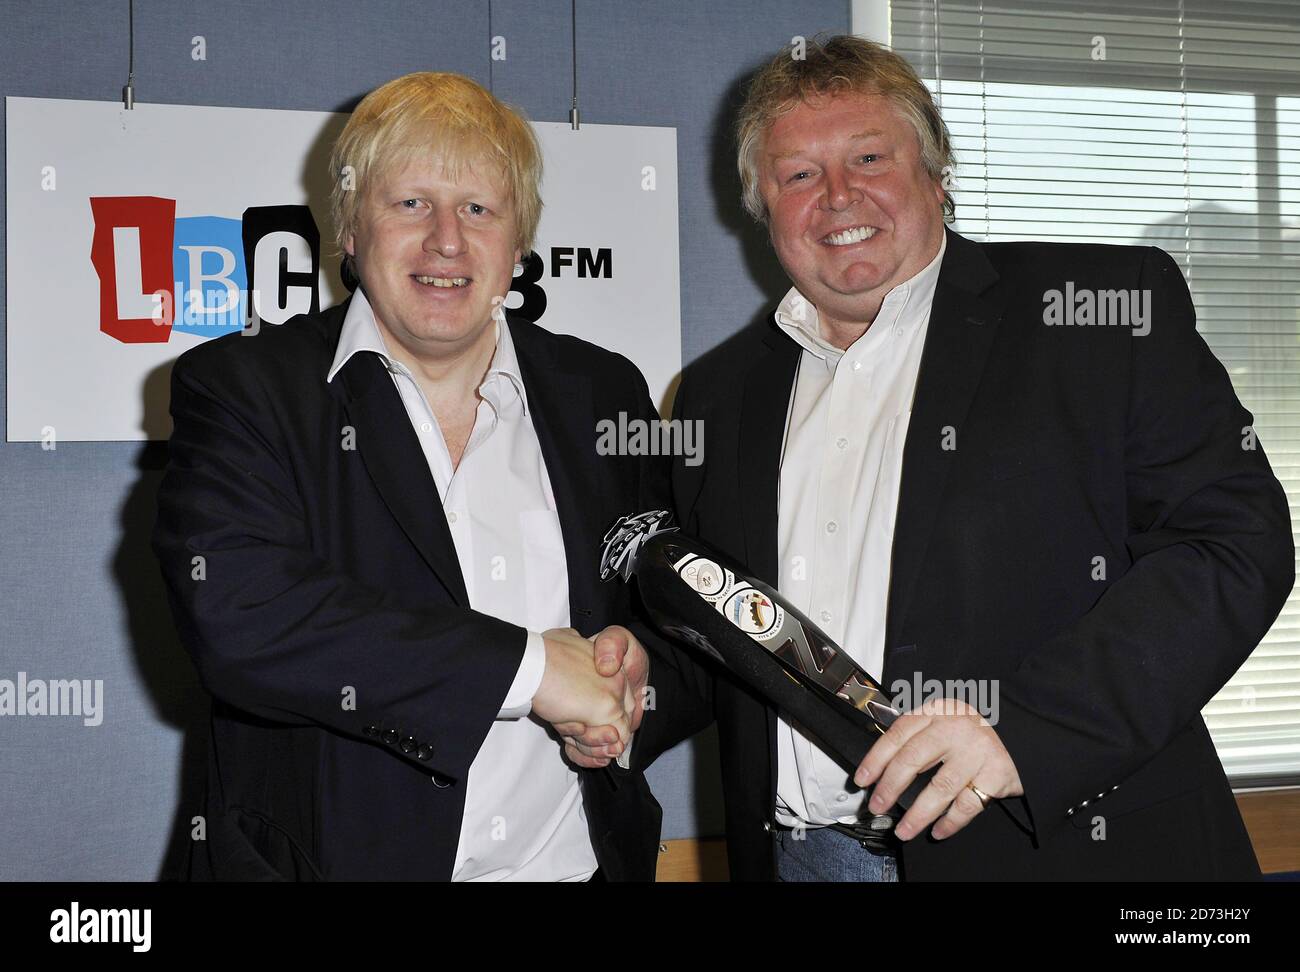 Boris Johnson being presented with a mudguard for his bike, by LBC DJ NIck Ferrari, after an interview on the radio station's breakfast show at their studio in Leicester Square, London. Stock Photo